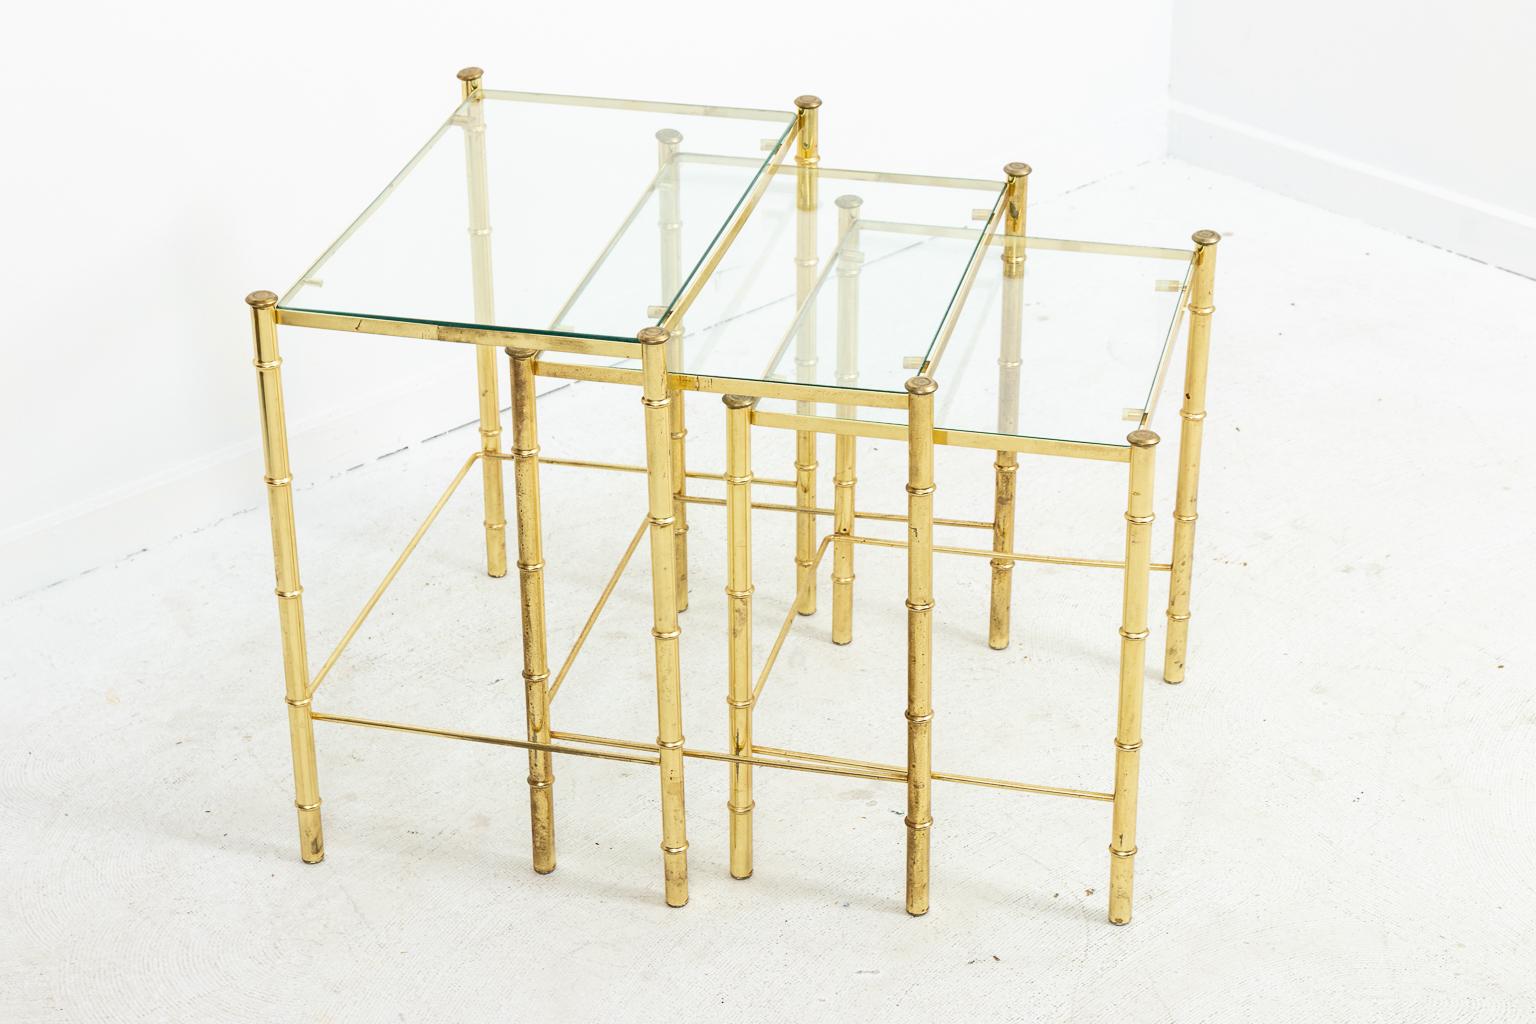 Faux bamboo frame nesting tables with glass tops, circa 1970s. Please note of wear consistent with age.